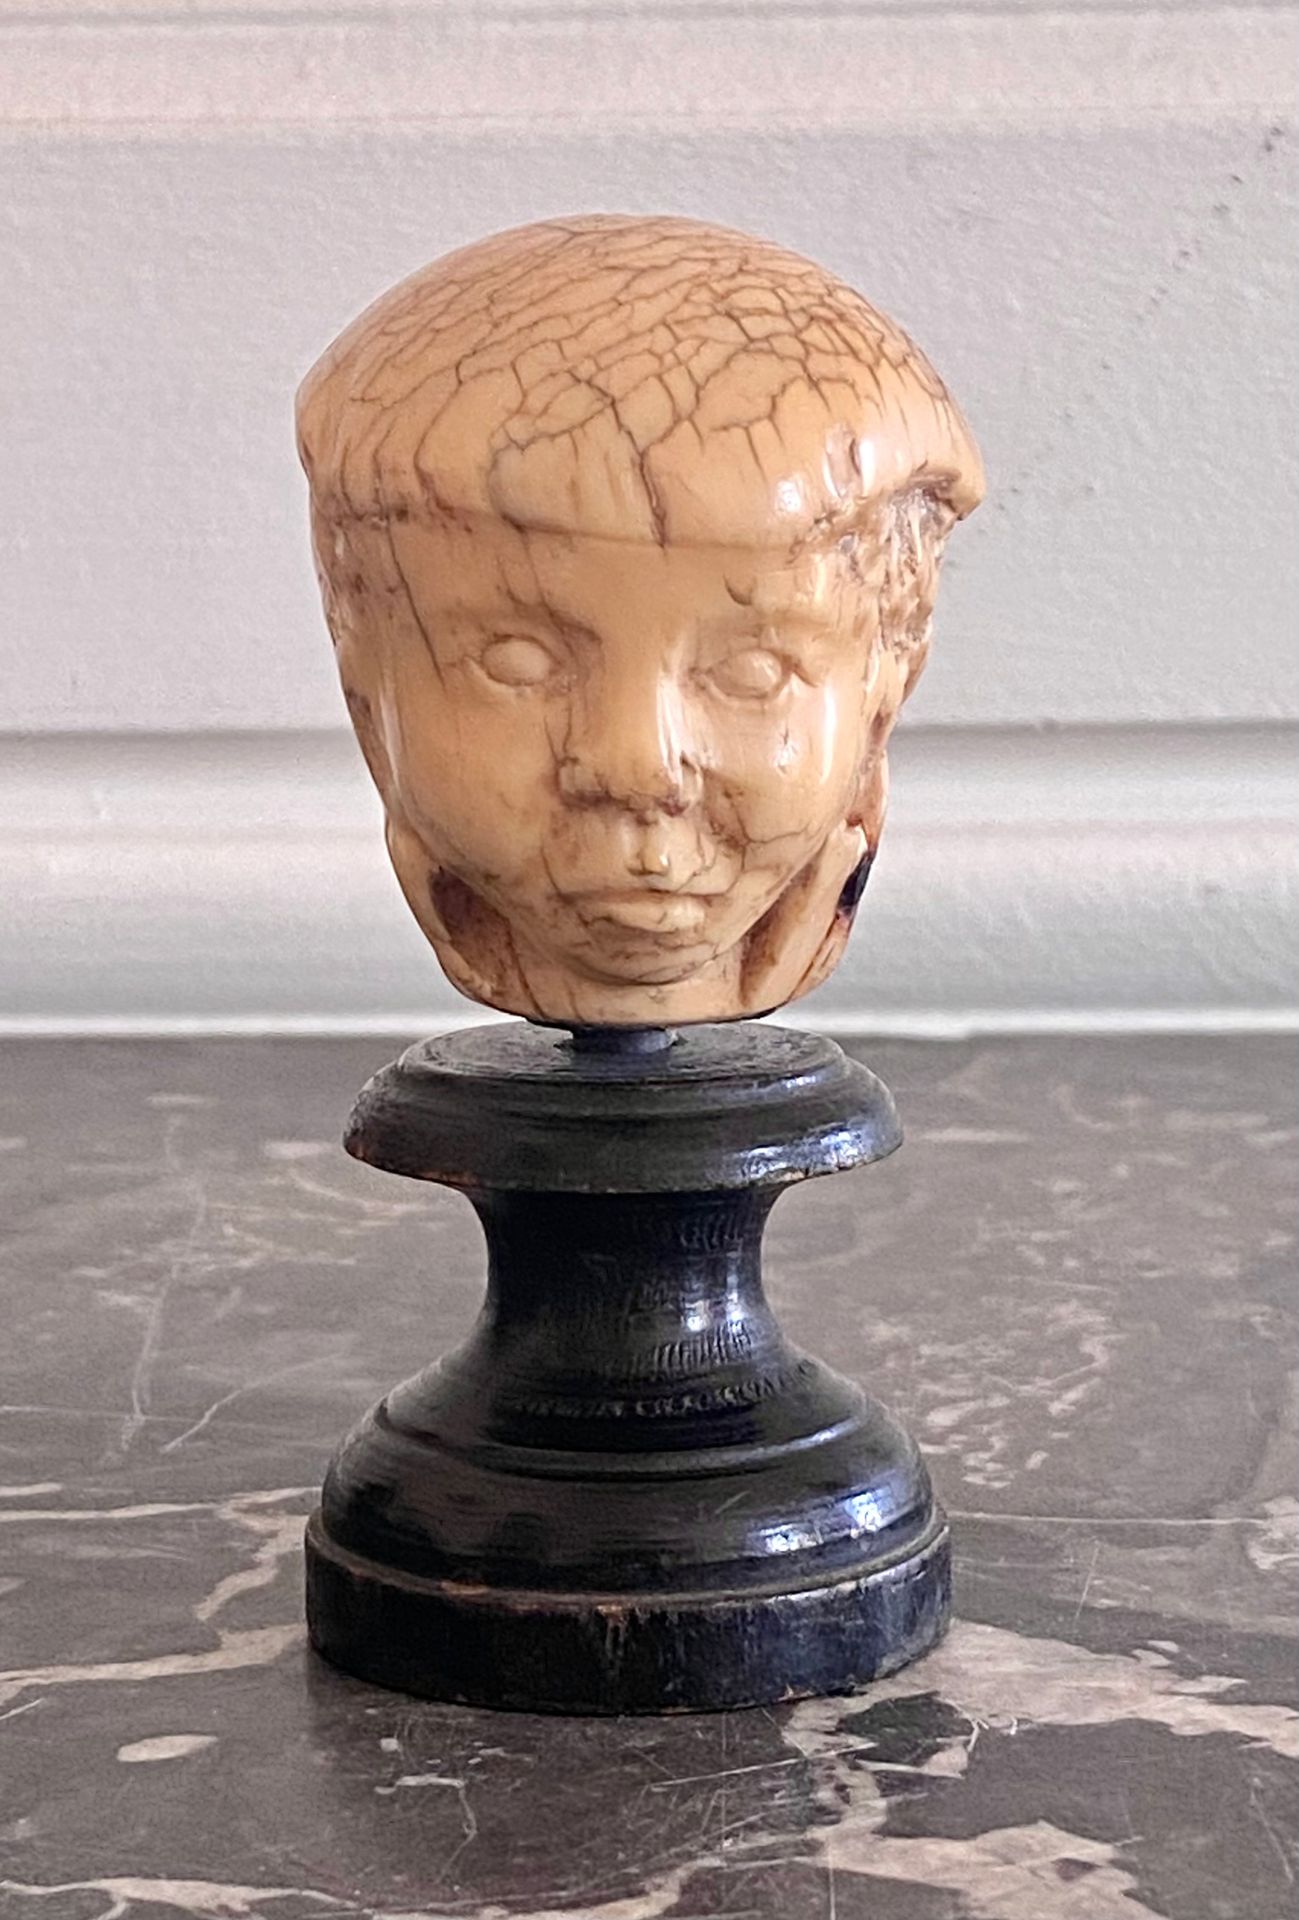 Null IVORY POMMAL carved in the shape of a man's head. Mounted on a turned woode&hellip;